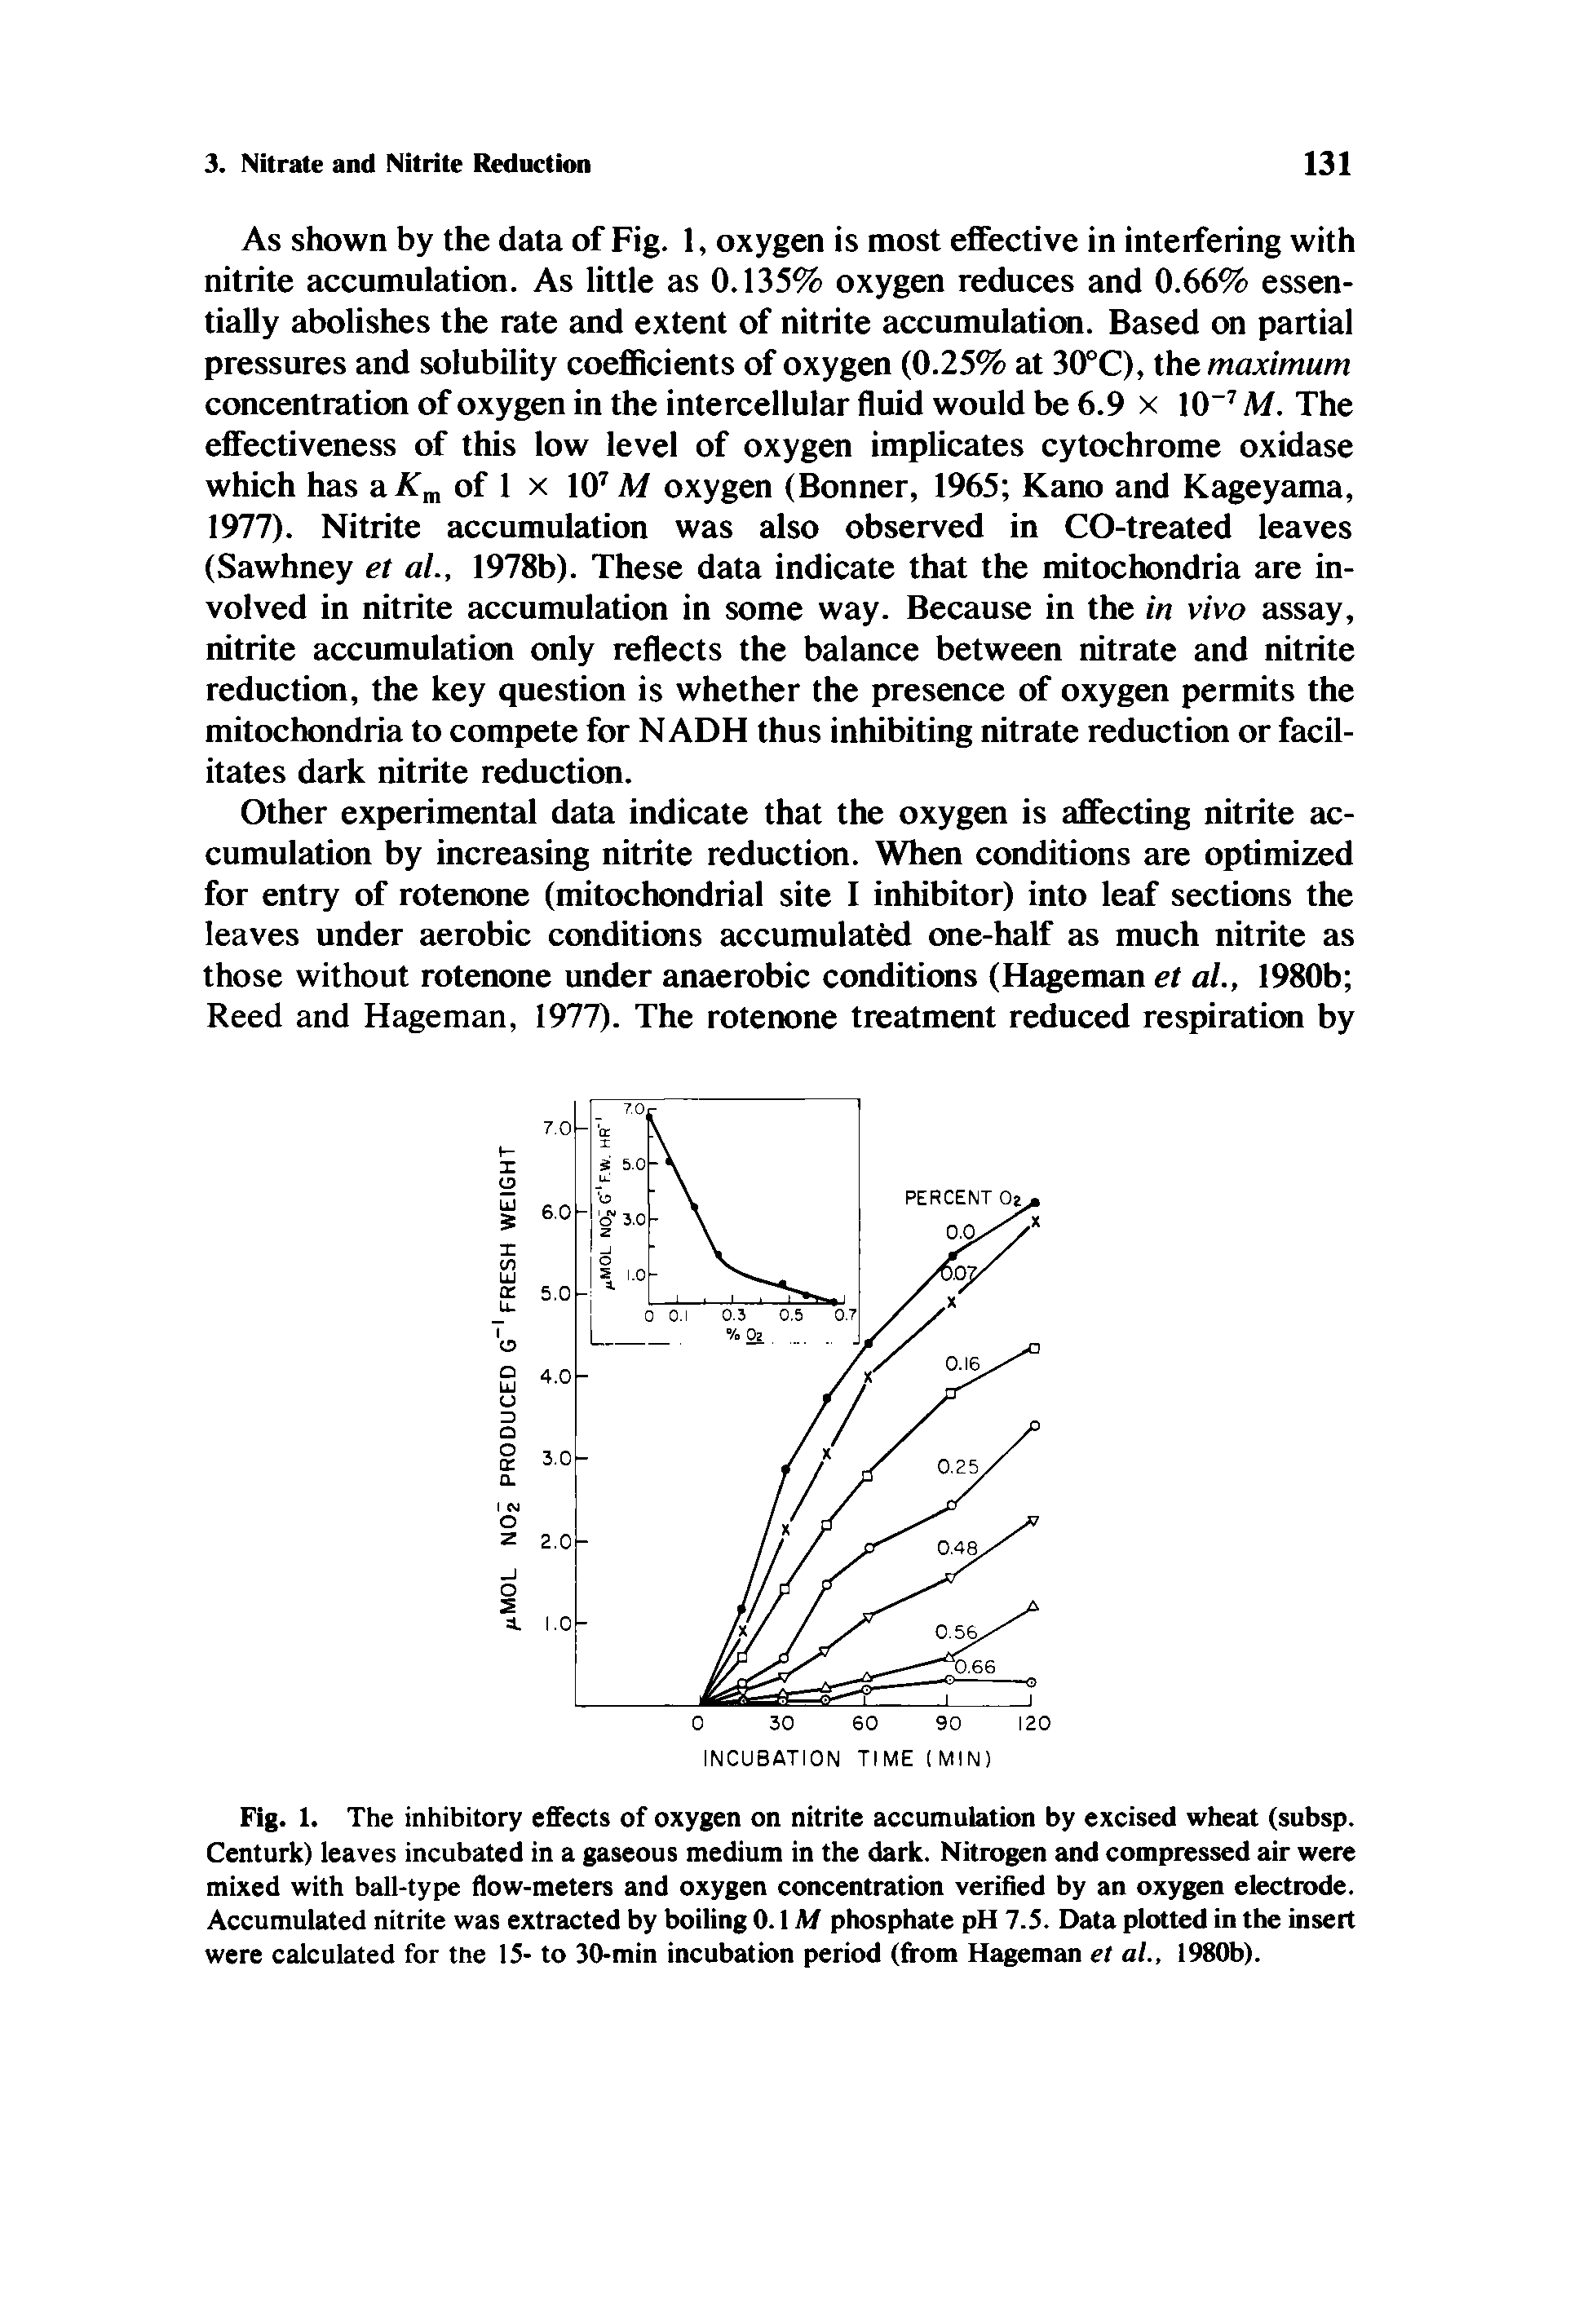 Fig. 1. The inhibitory effects of oxygen on nitrite accumulation by excised wheat (subsp. Centurk) leaves incubated in a gaseous medium in the dark. Nitrogen and compressed air were mixed with ball-type flow-meters and oxygen concentration verified by an oxygen electrode. Accumulated nitrite was extracted by boiling 0.1M phosphate pH 7.5. Data plotted in the insert were calculated for tne 15- to 30-min incubation period (from Hageman et at., 1980b).